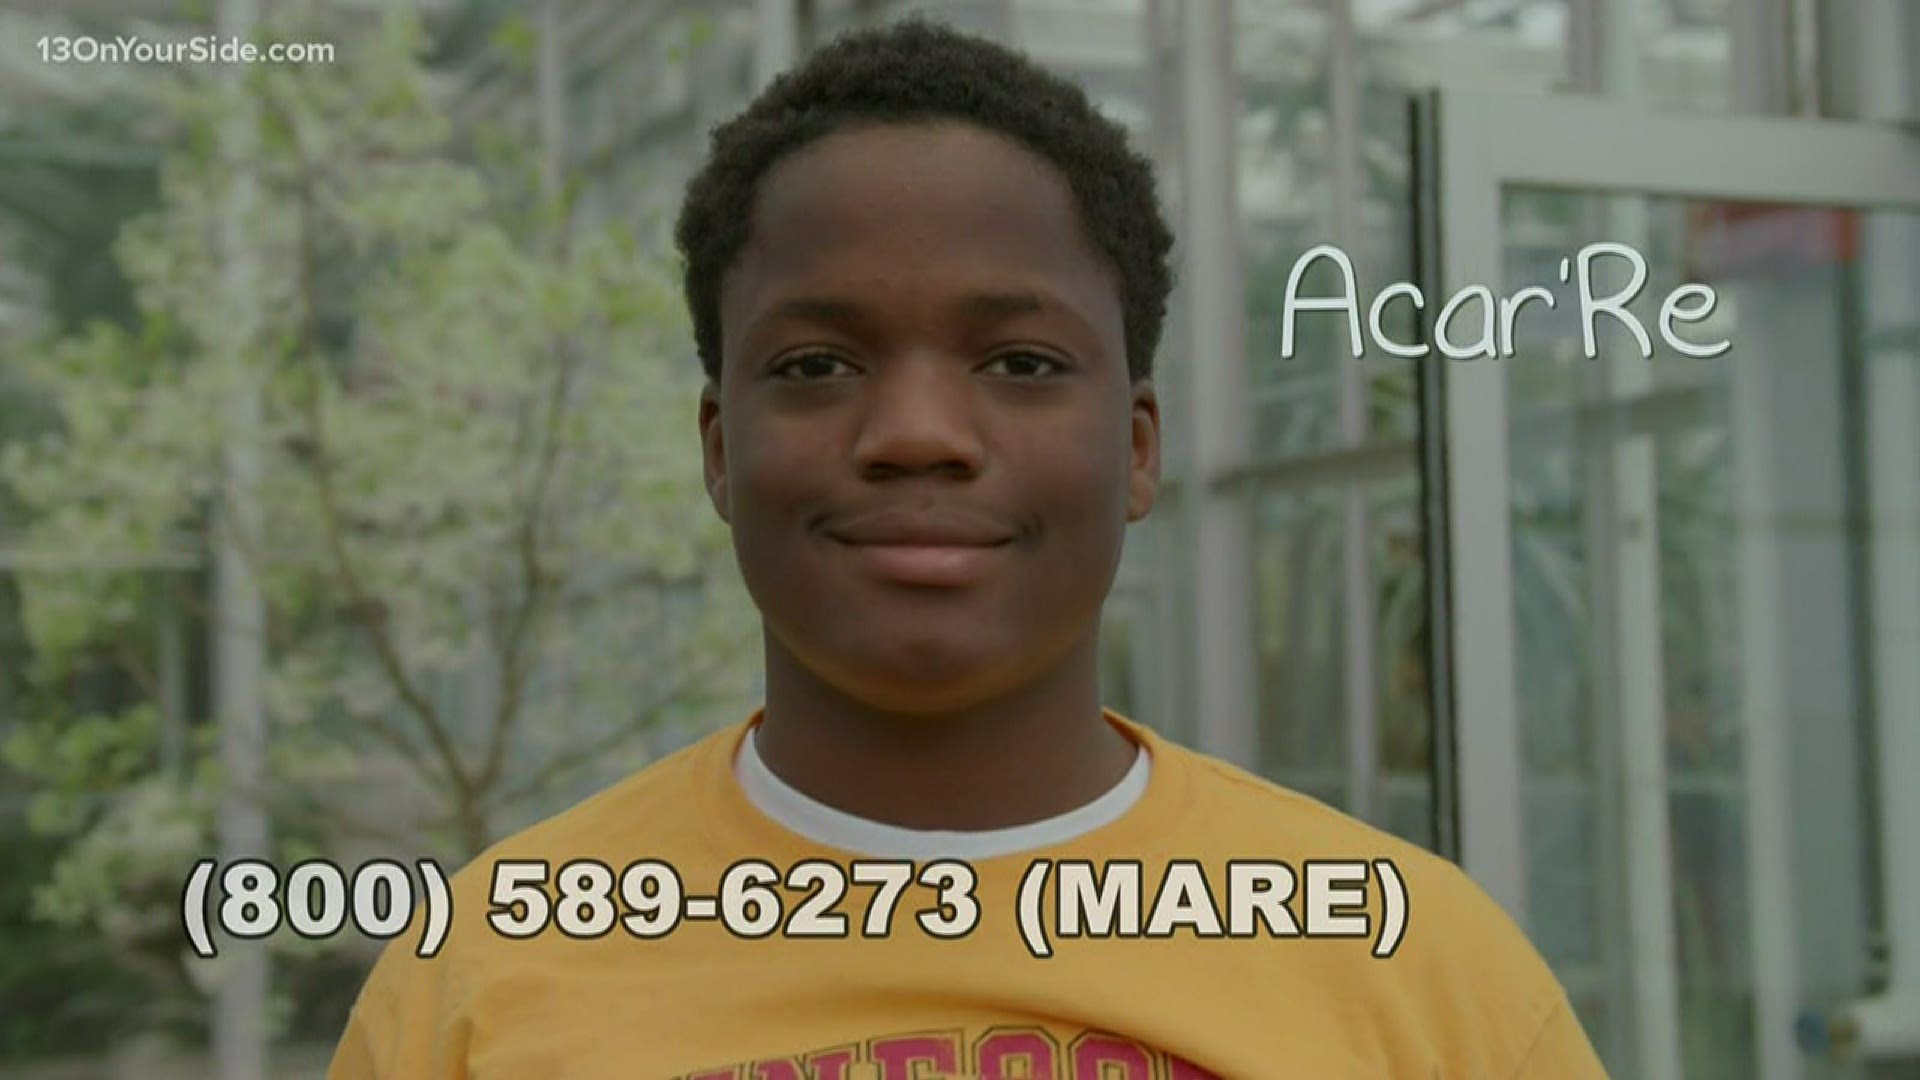 He's a busy 15-Year-Old who loves sports.  It's time to help Acar'Re find his forever family.